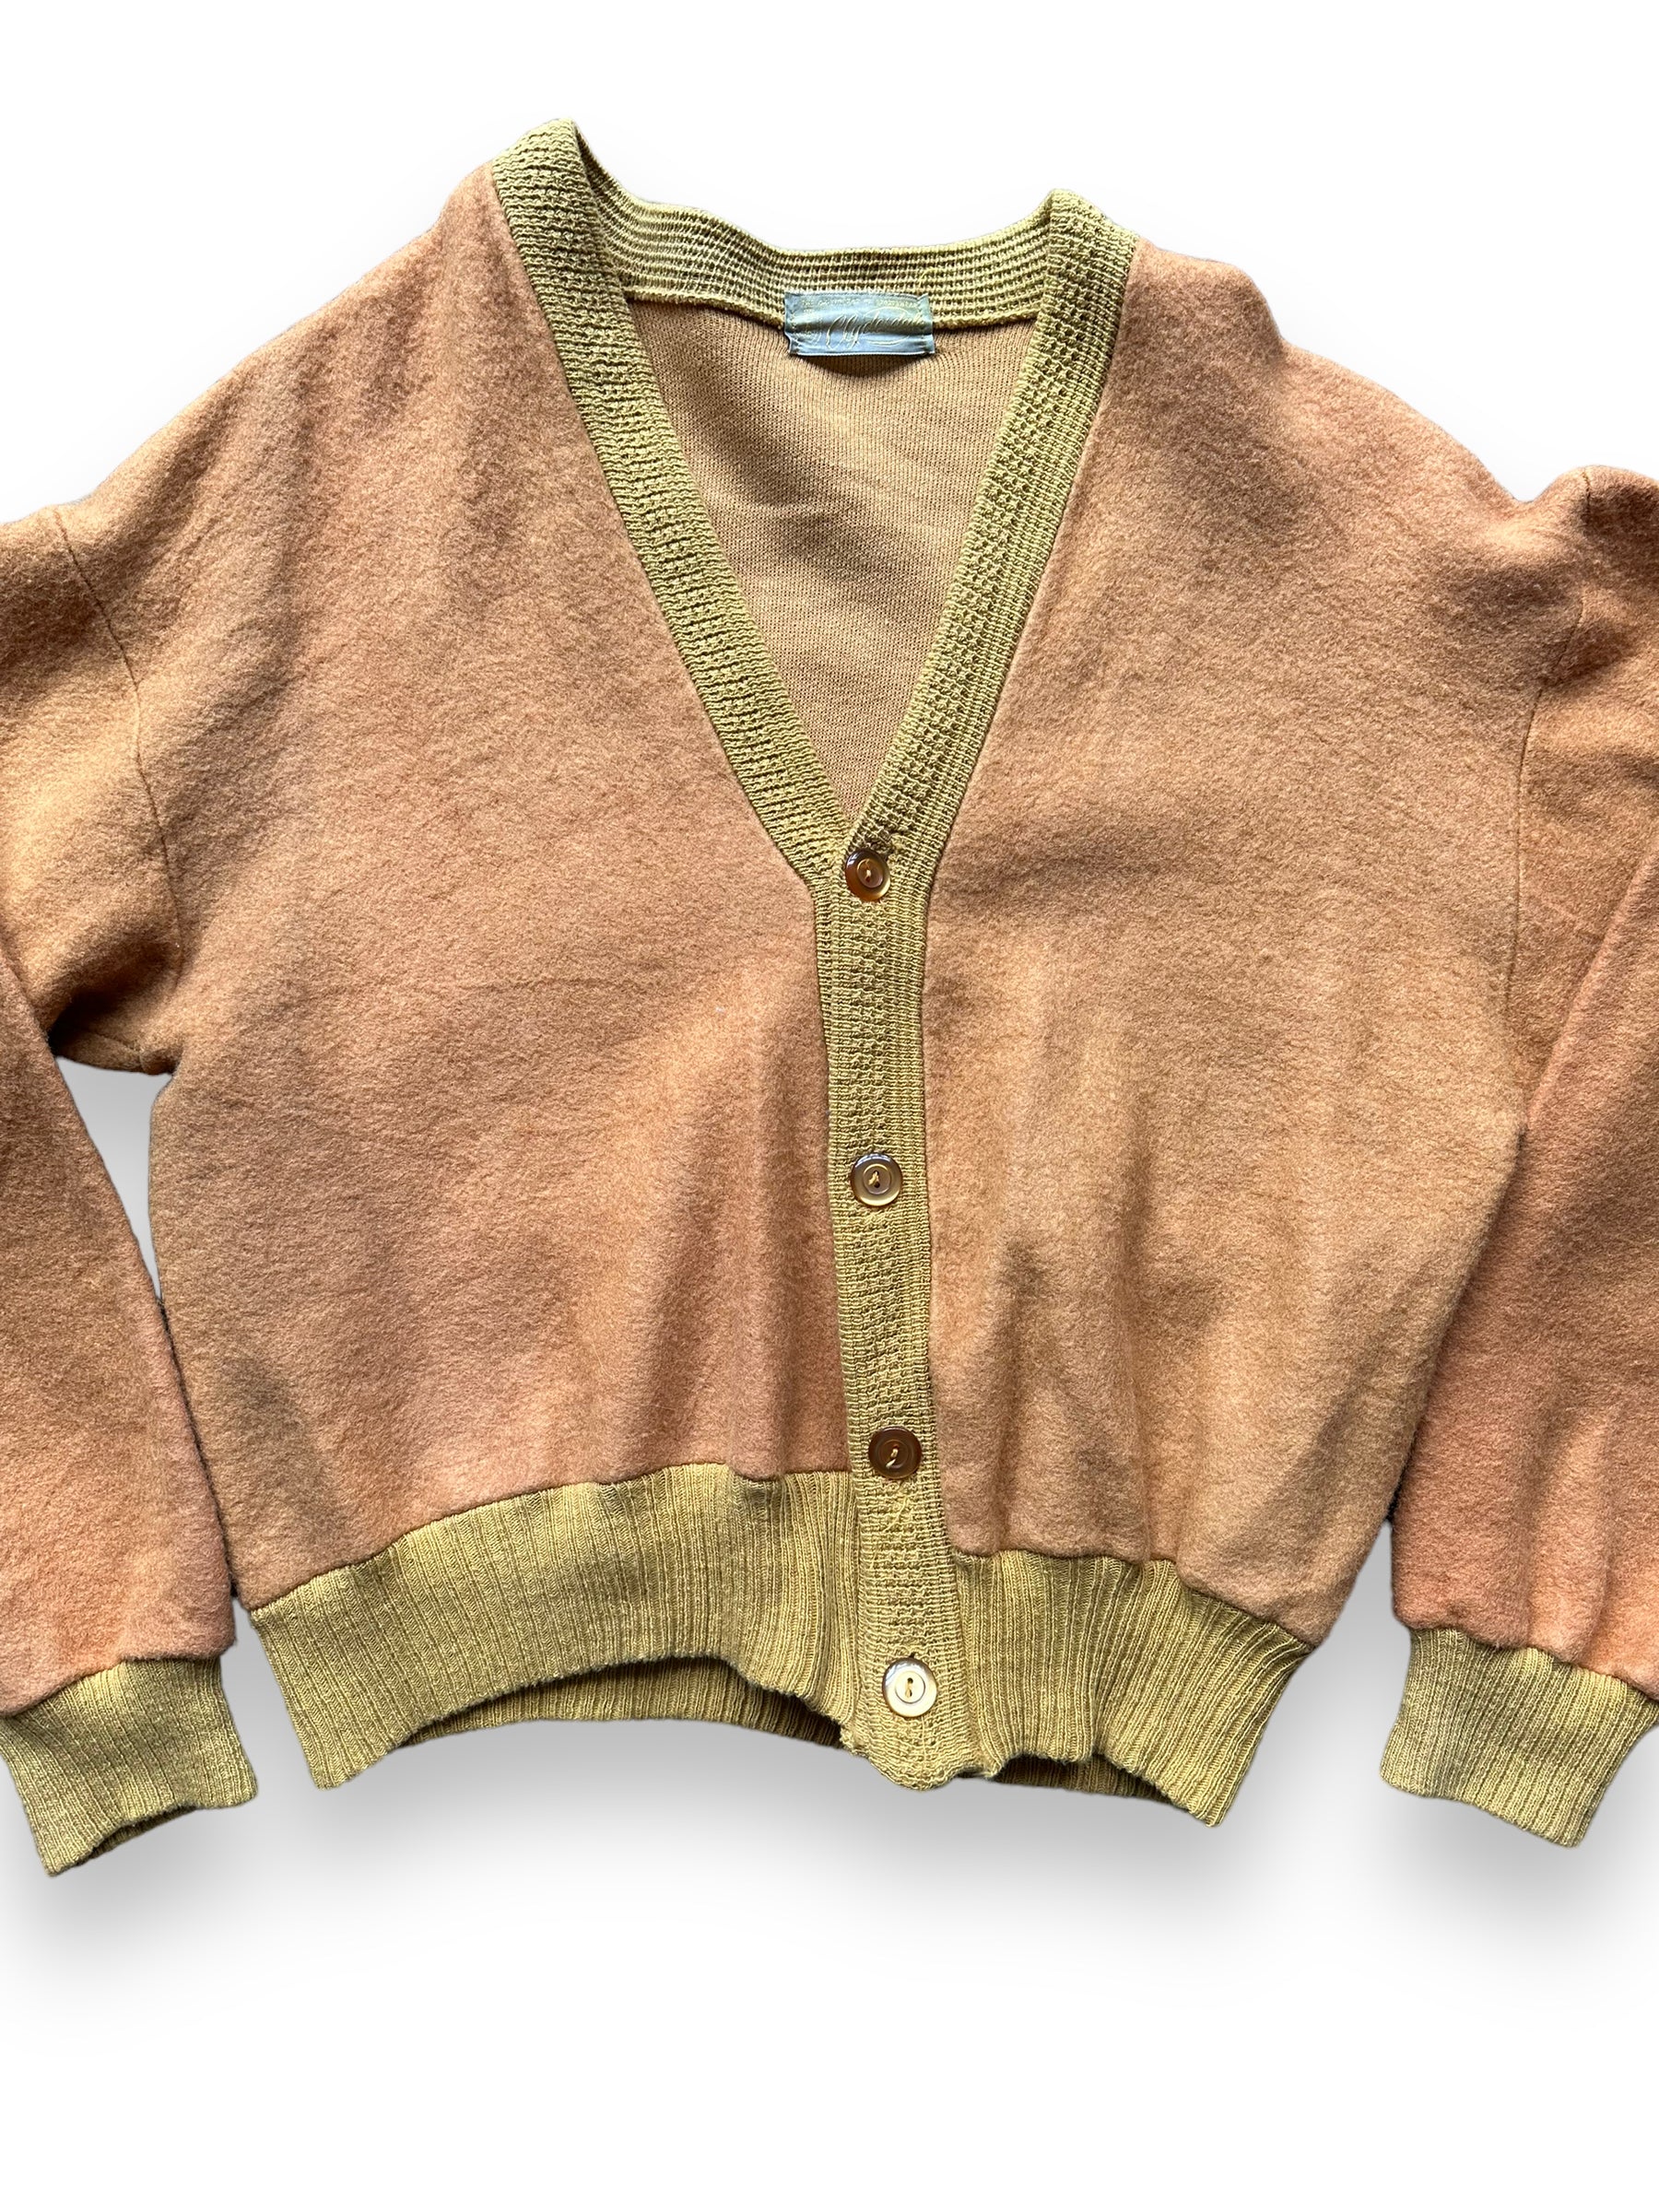 Front Detail on Vintage 1930s Clydesdale Cardigan SZ L | Vintage Cardigan Sweaters | Vintage Clothing Seattle